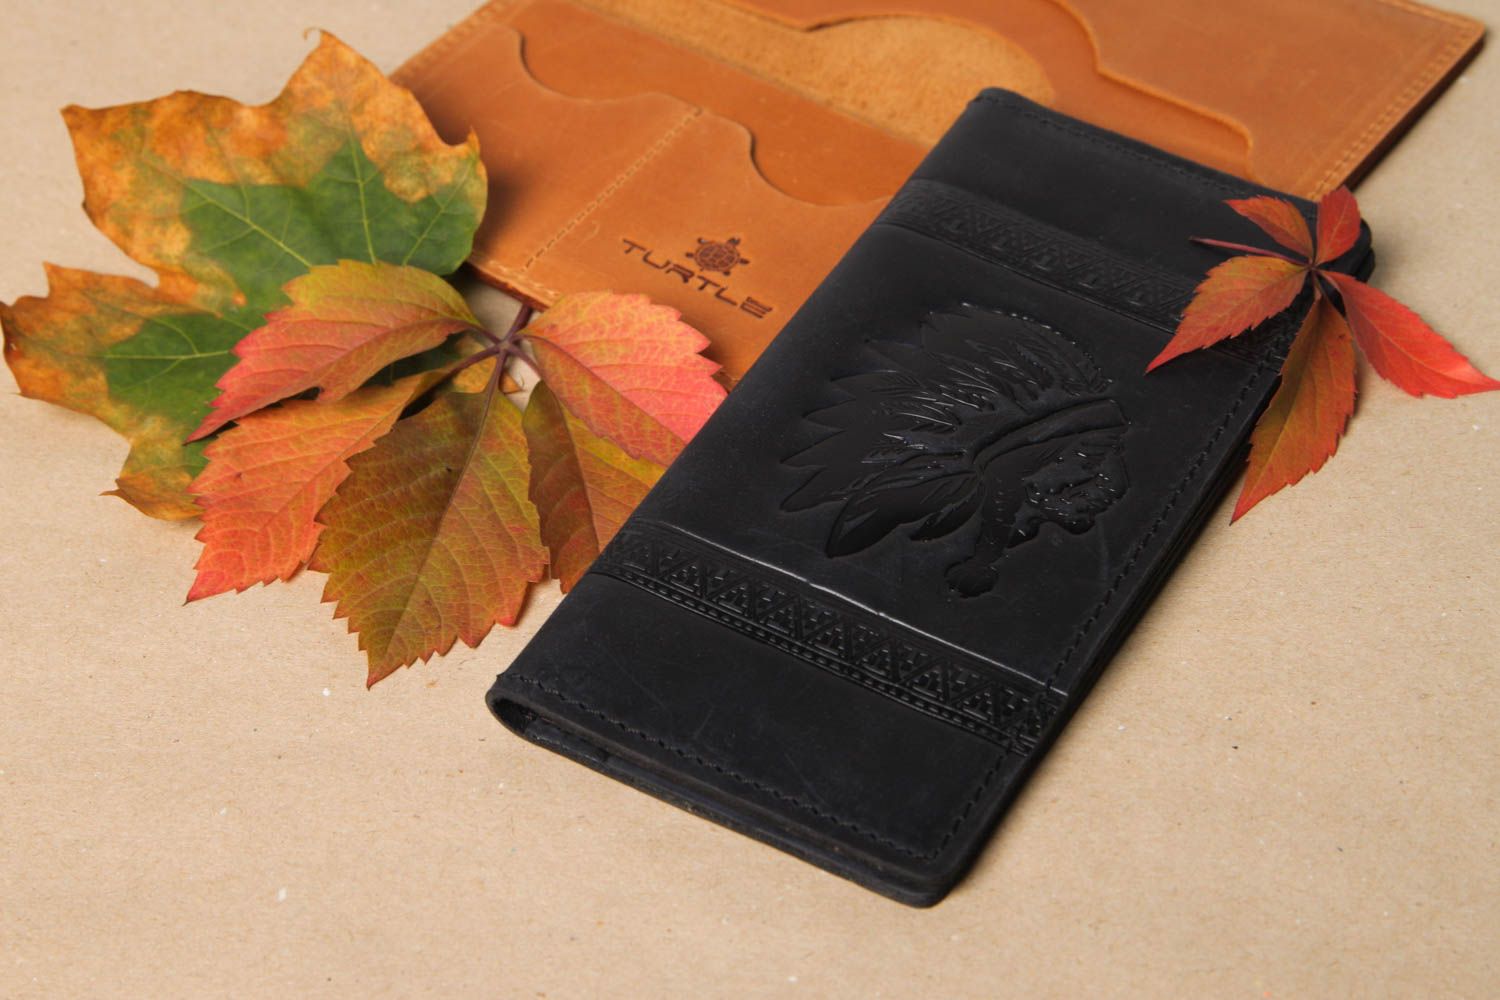 Unusual handmade leather wallet handmade accessories for men gift ideas photo 1